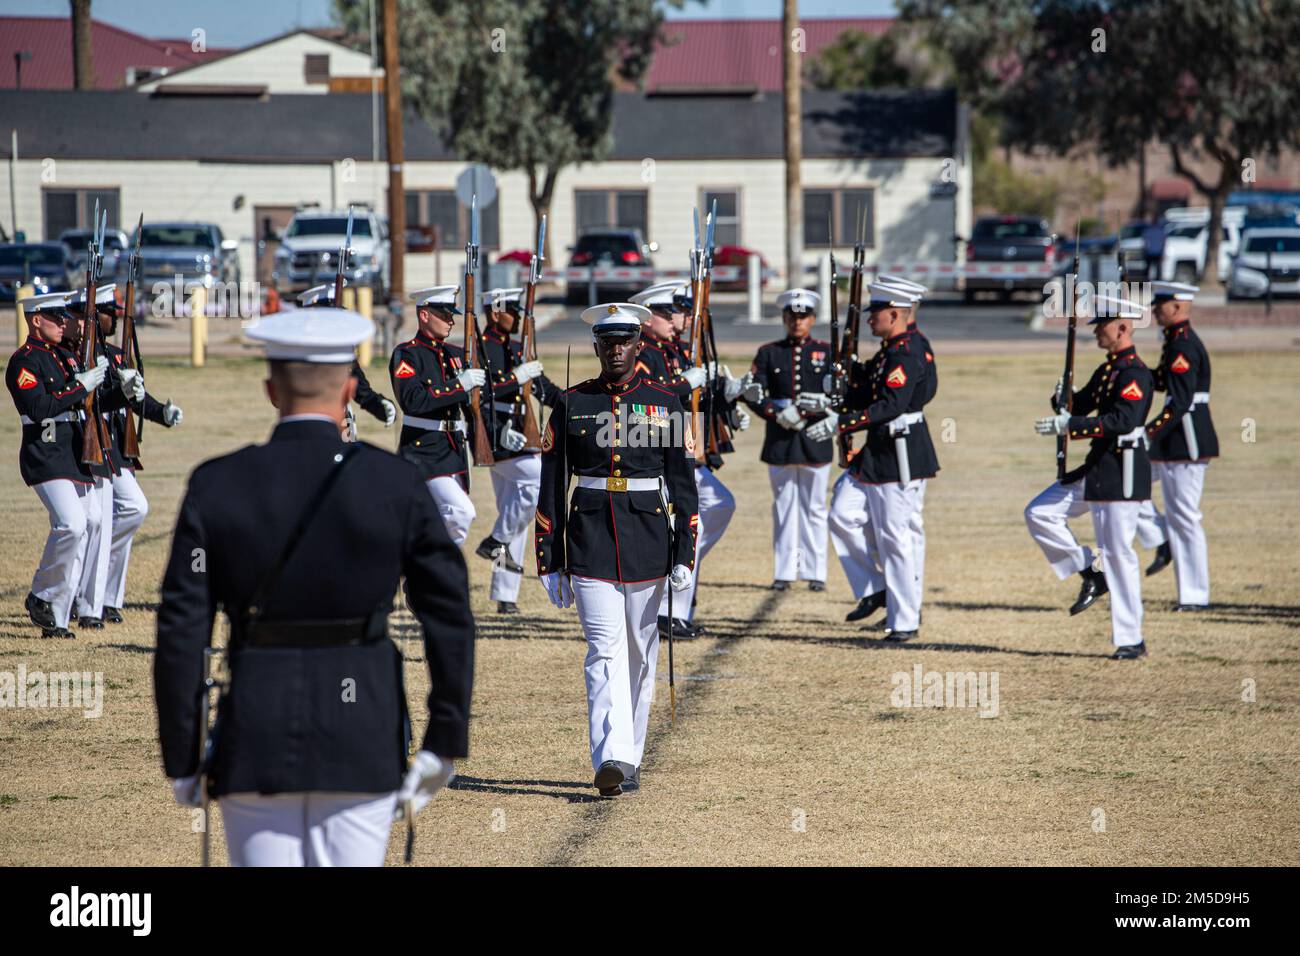 Staff Sgt. Henry Truzy III, platoon sergeant, Silent Drill Platoon, marches onto the field during a Battle Color Ceremony at Marine Corps Air Station Yuma, Ariz., March 3, 2022. This performance was the culmination of multiple weeks of training. Stock Photo